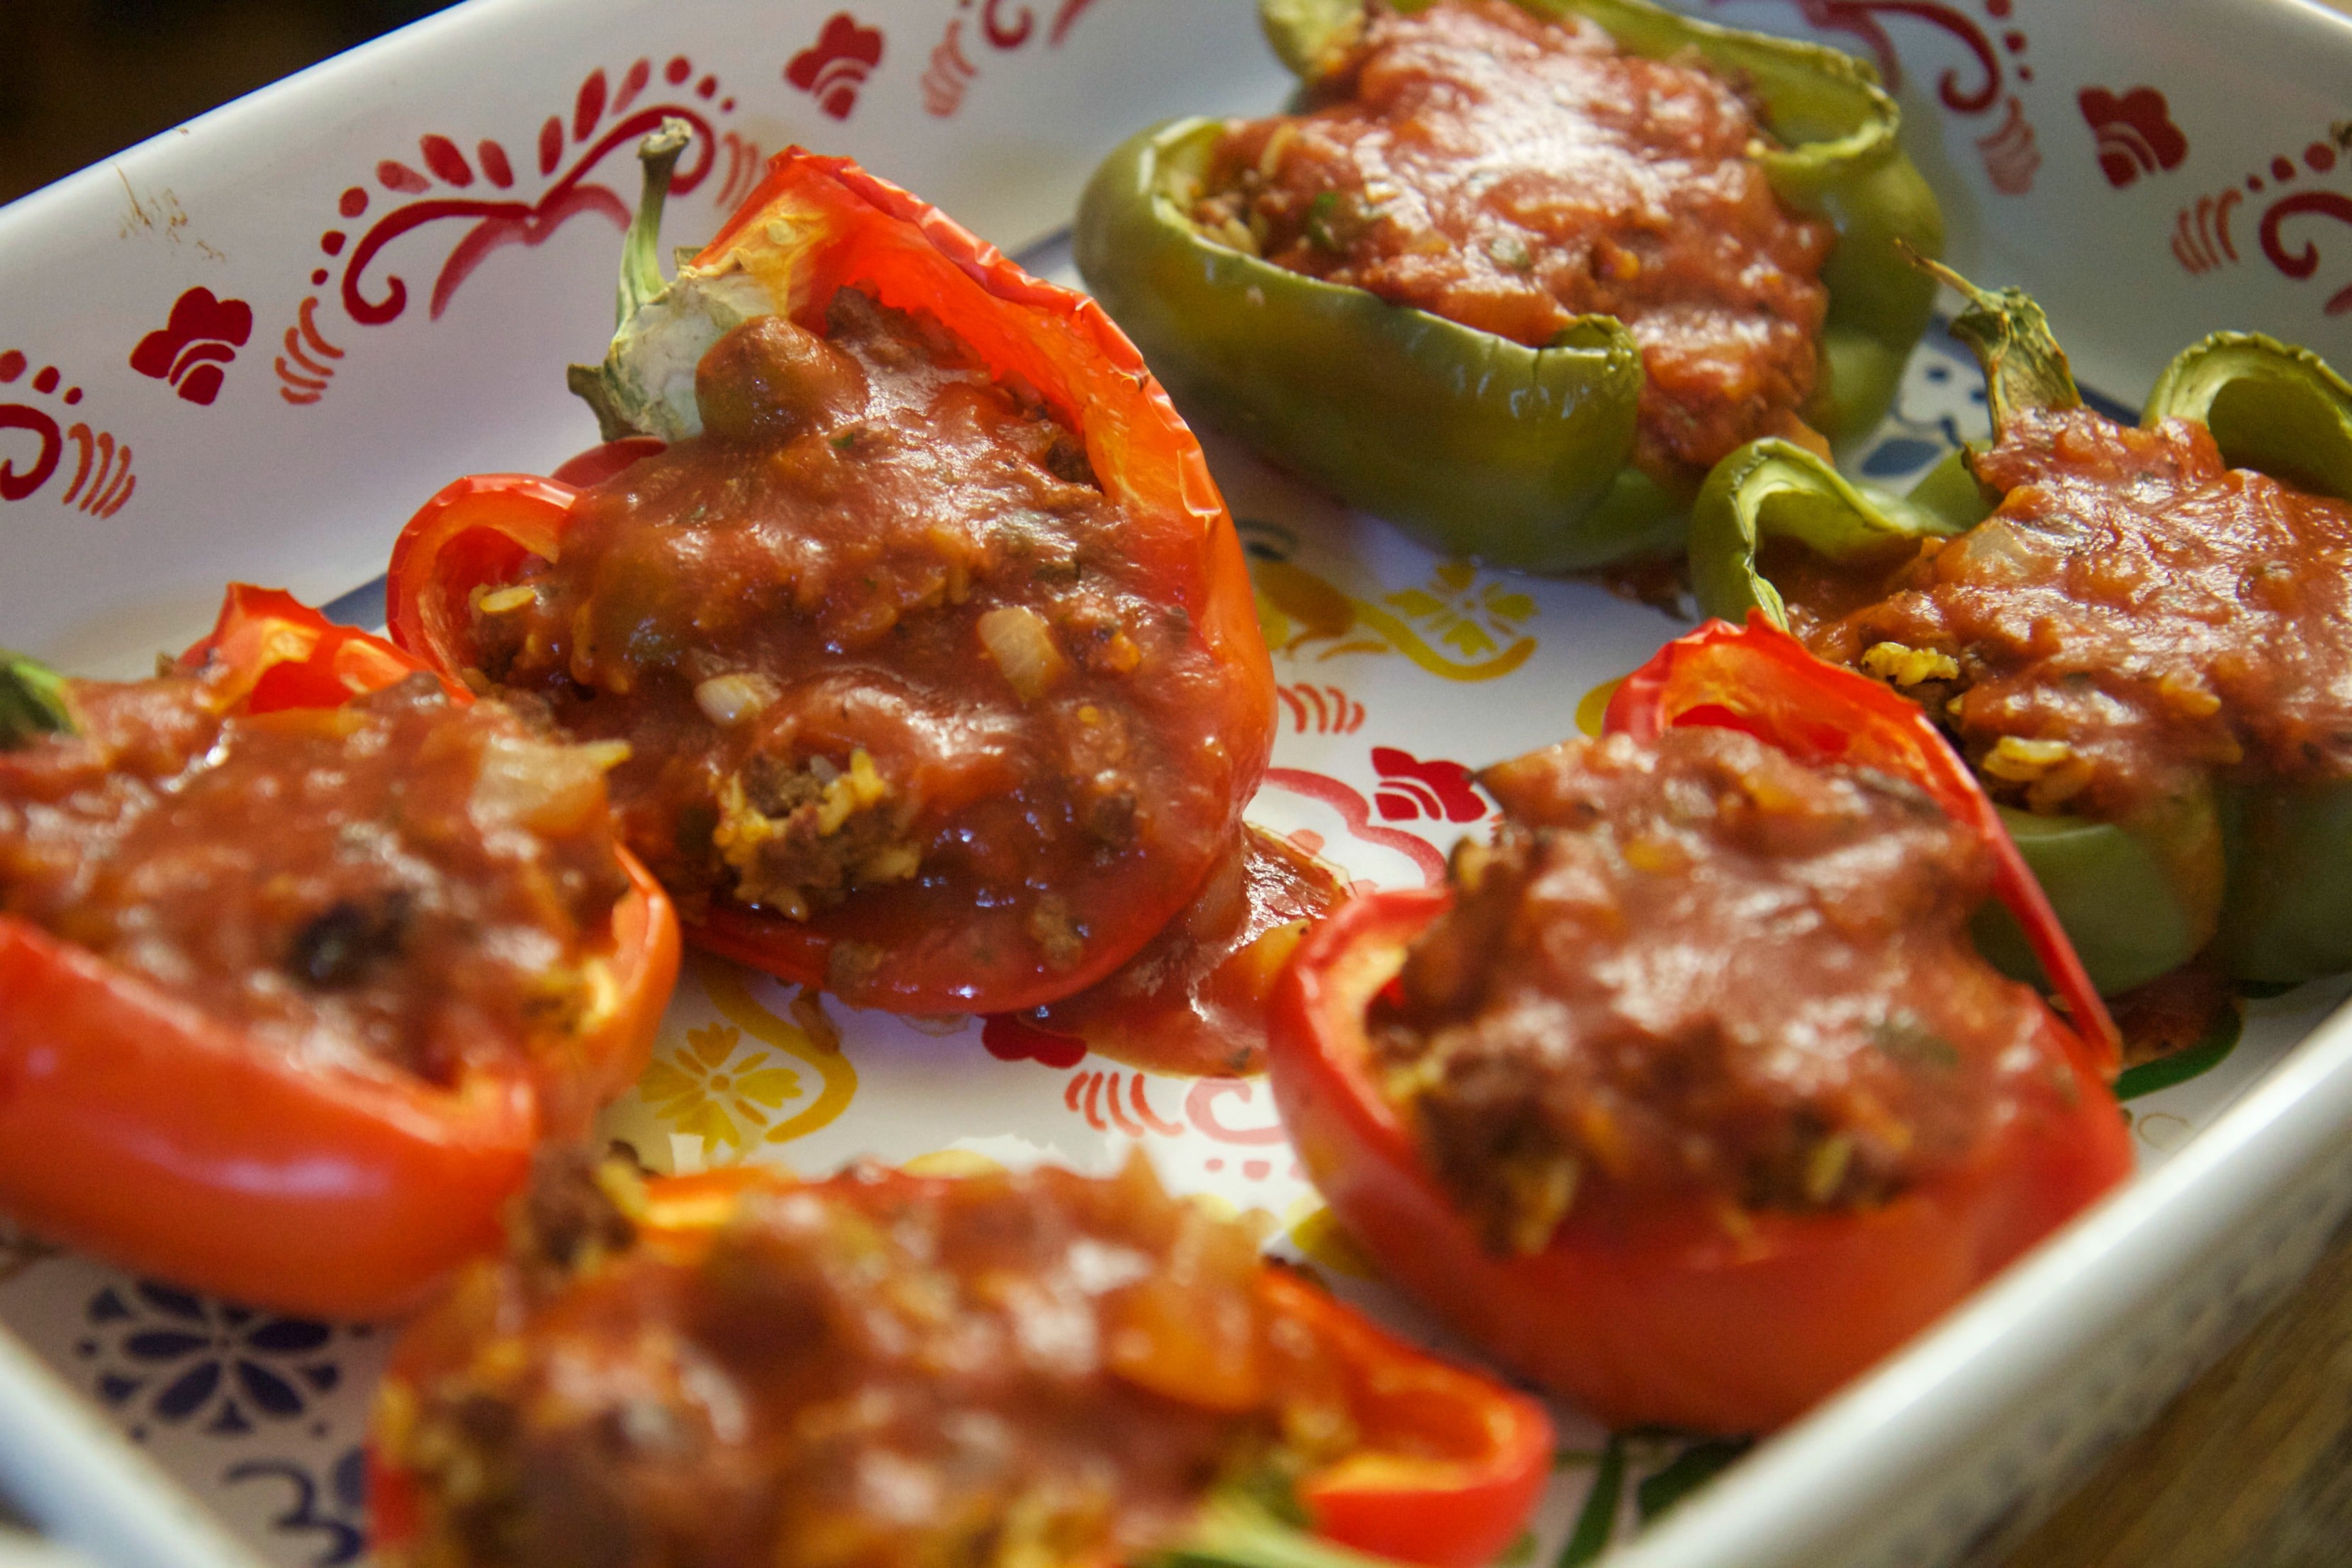 stuffed bell peppers with ground beef and rice